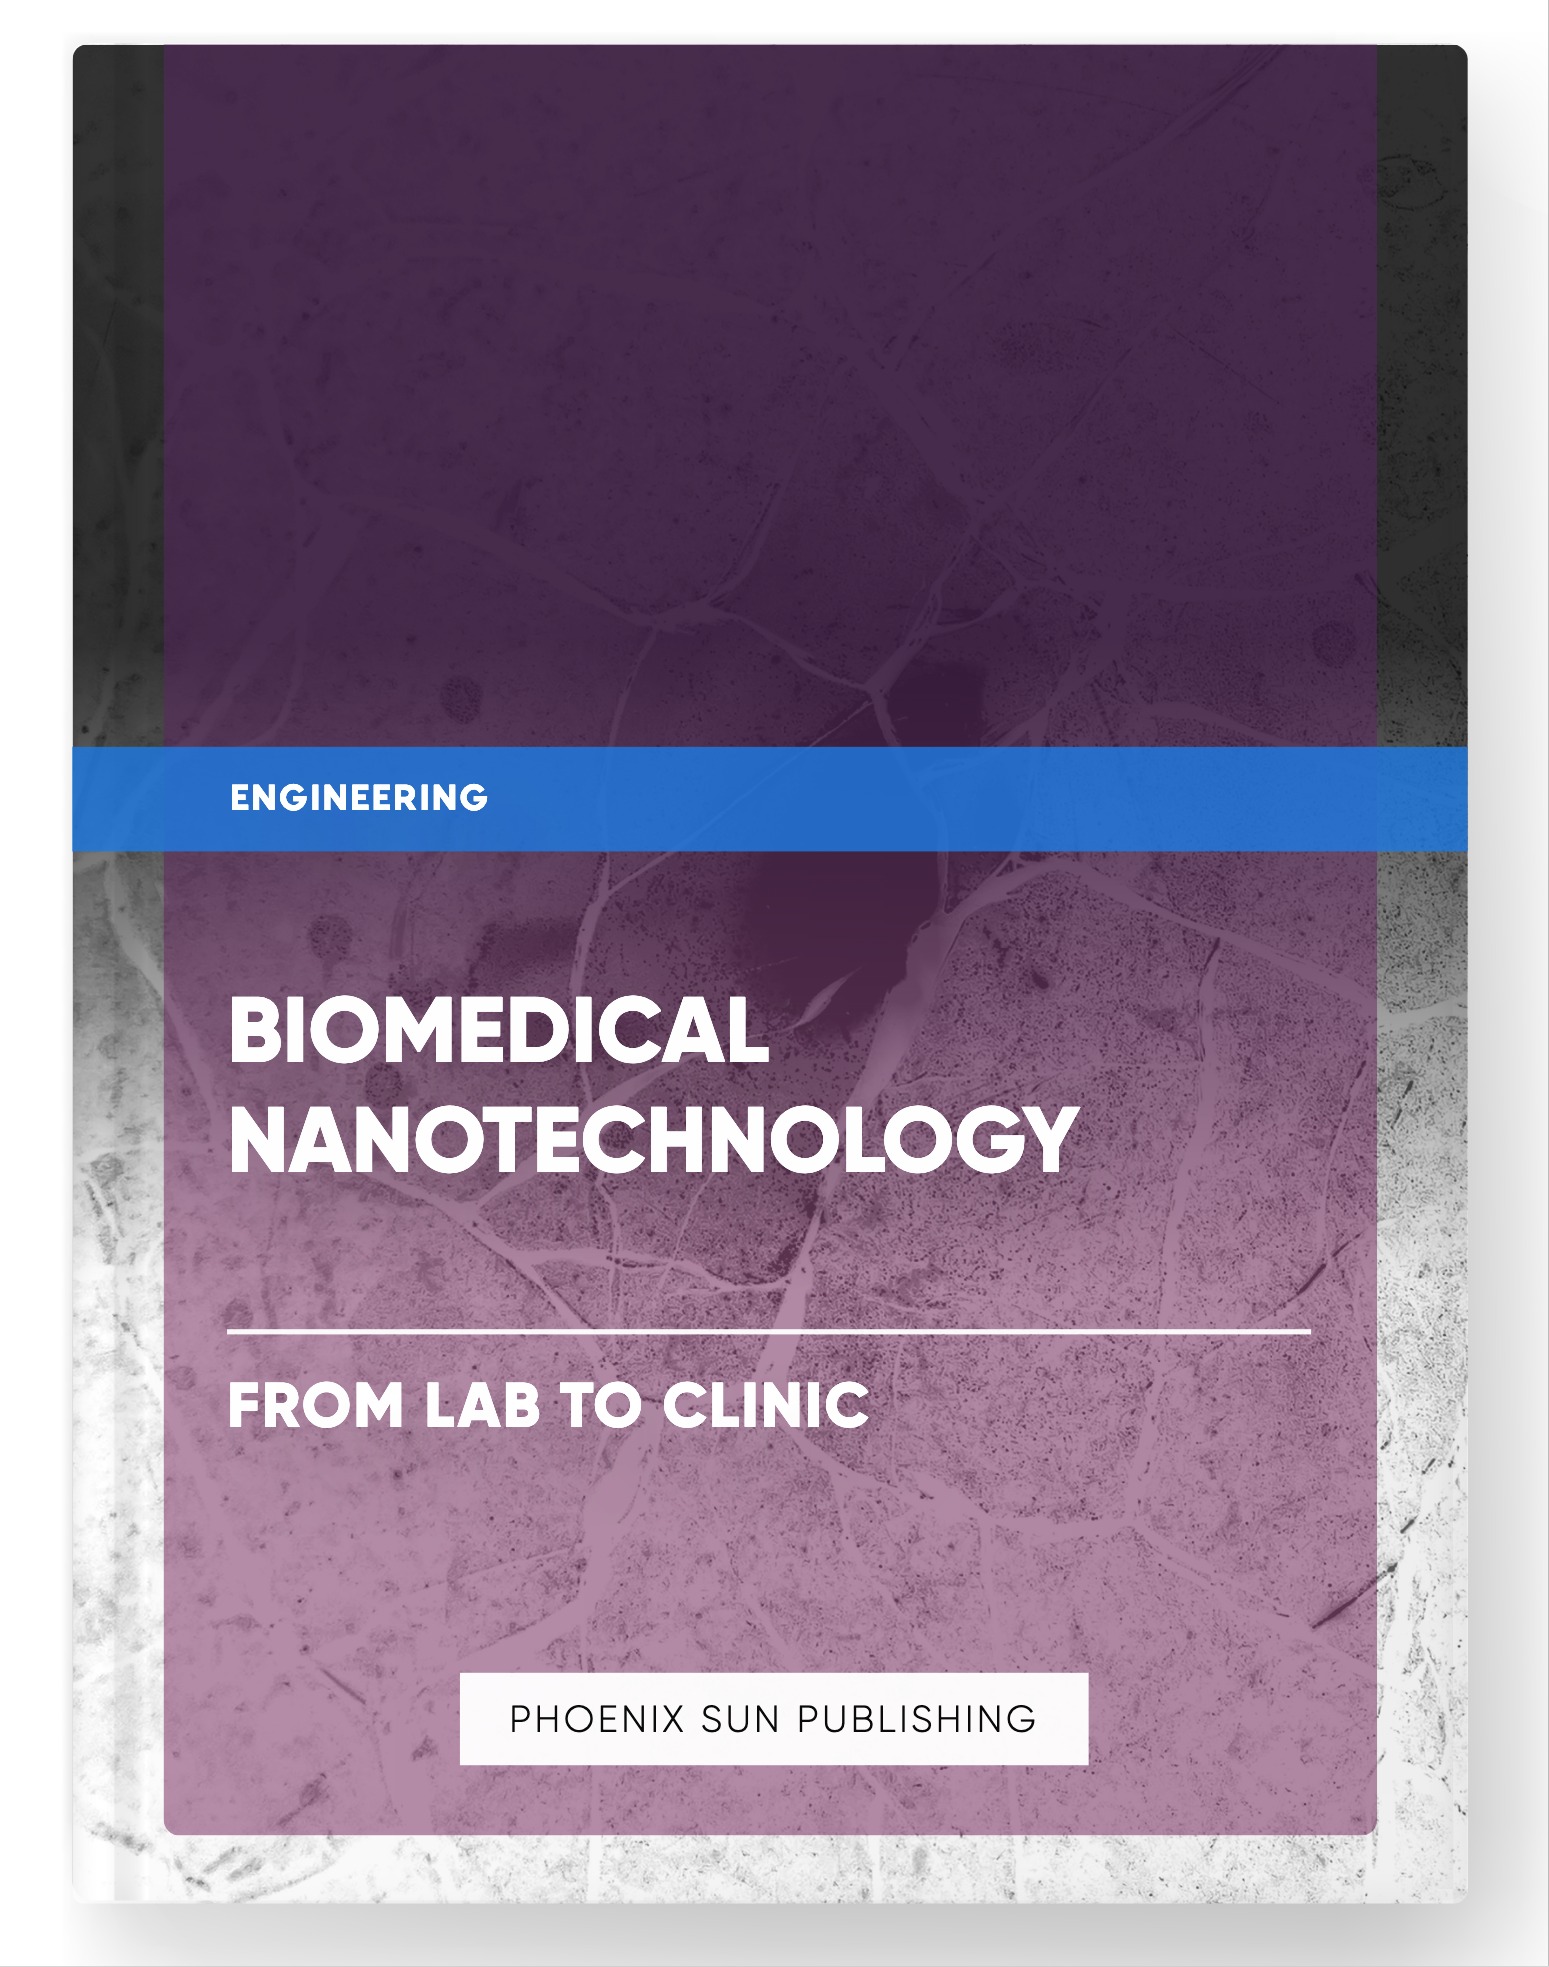 Biomedical Nanotechnology – From Lab to Clinic